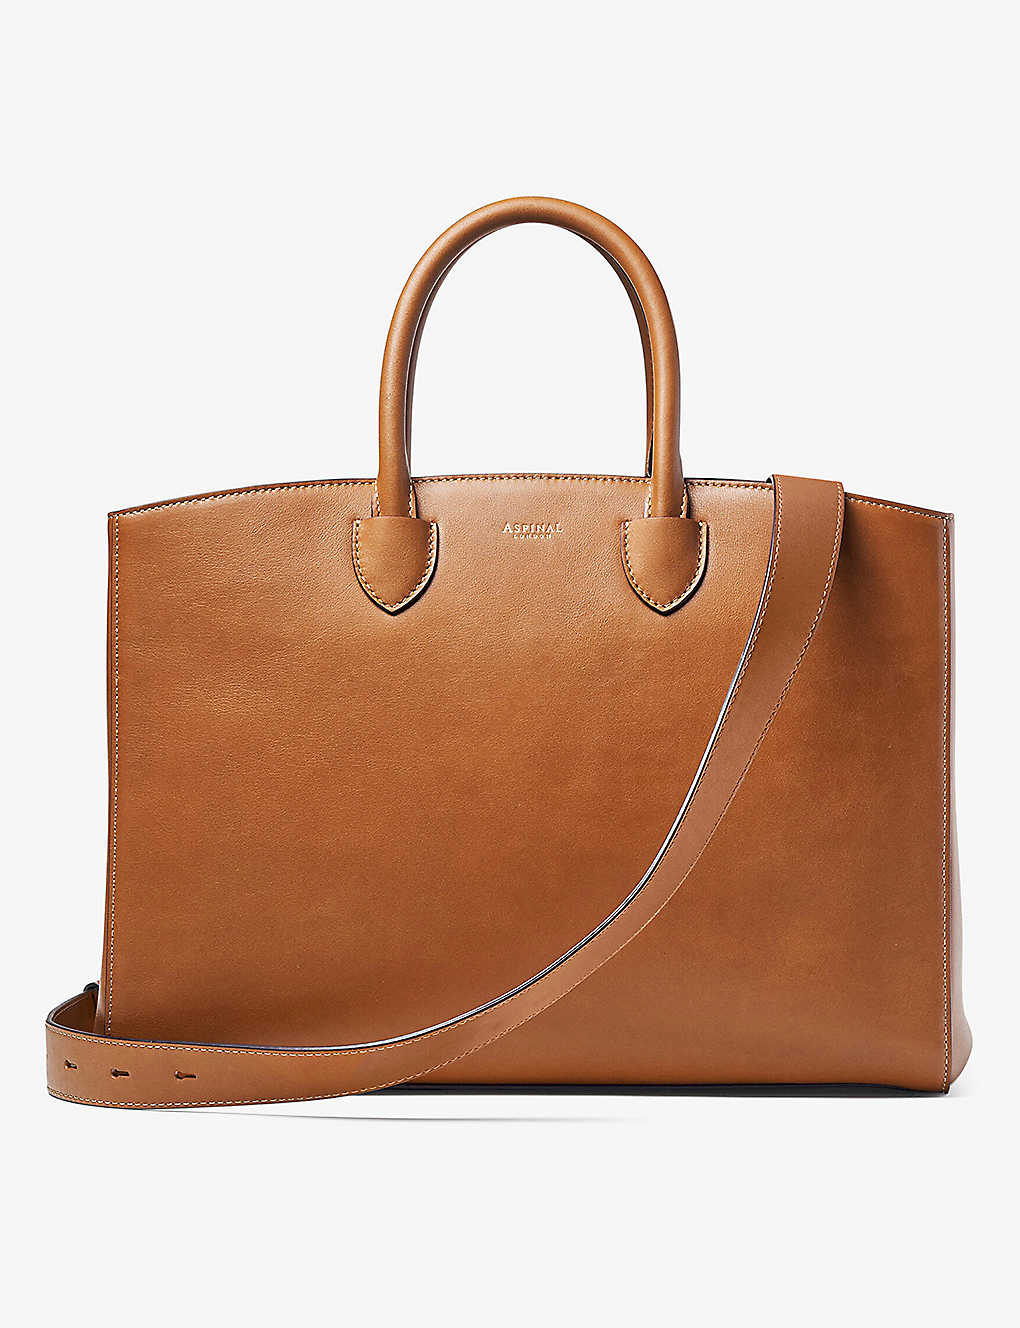 Aspinal Of London Womens Tan Madison Branded Leather Tote Bag